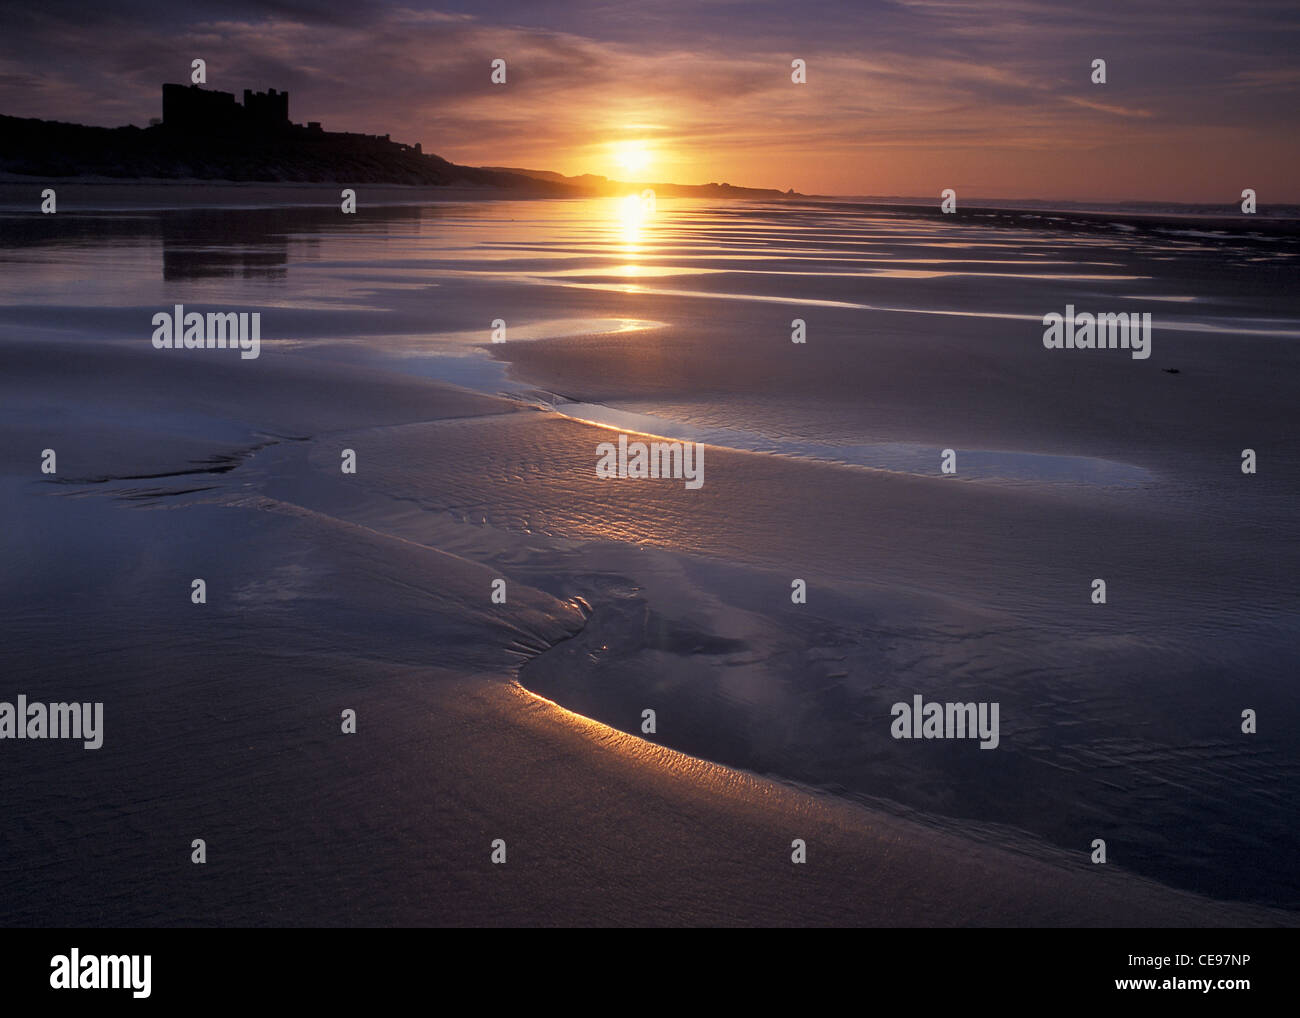 Bands of wet and dry sand left by the retreating tide catch the spring sunset at Bamburgh, Northumberland. Stock Photo